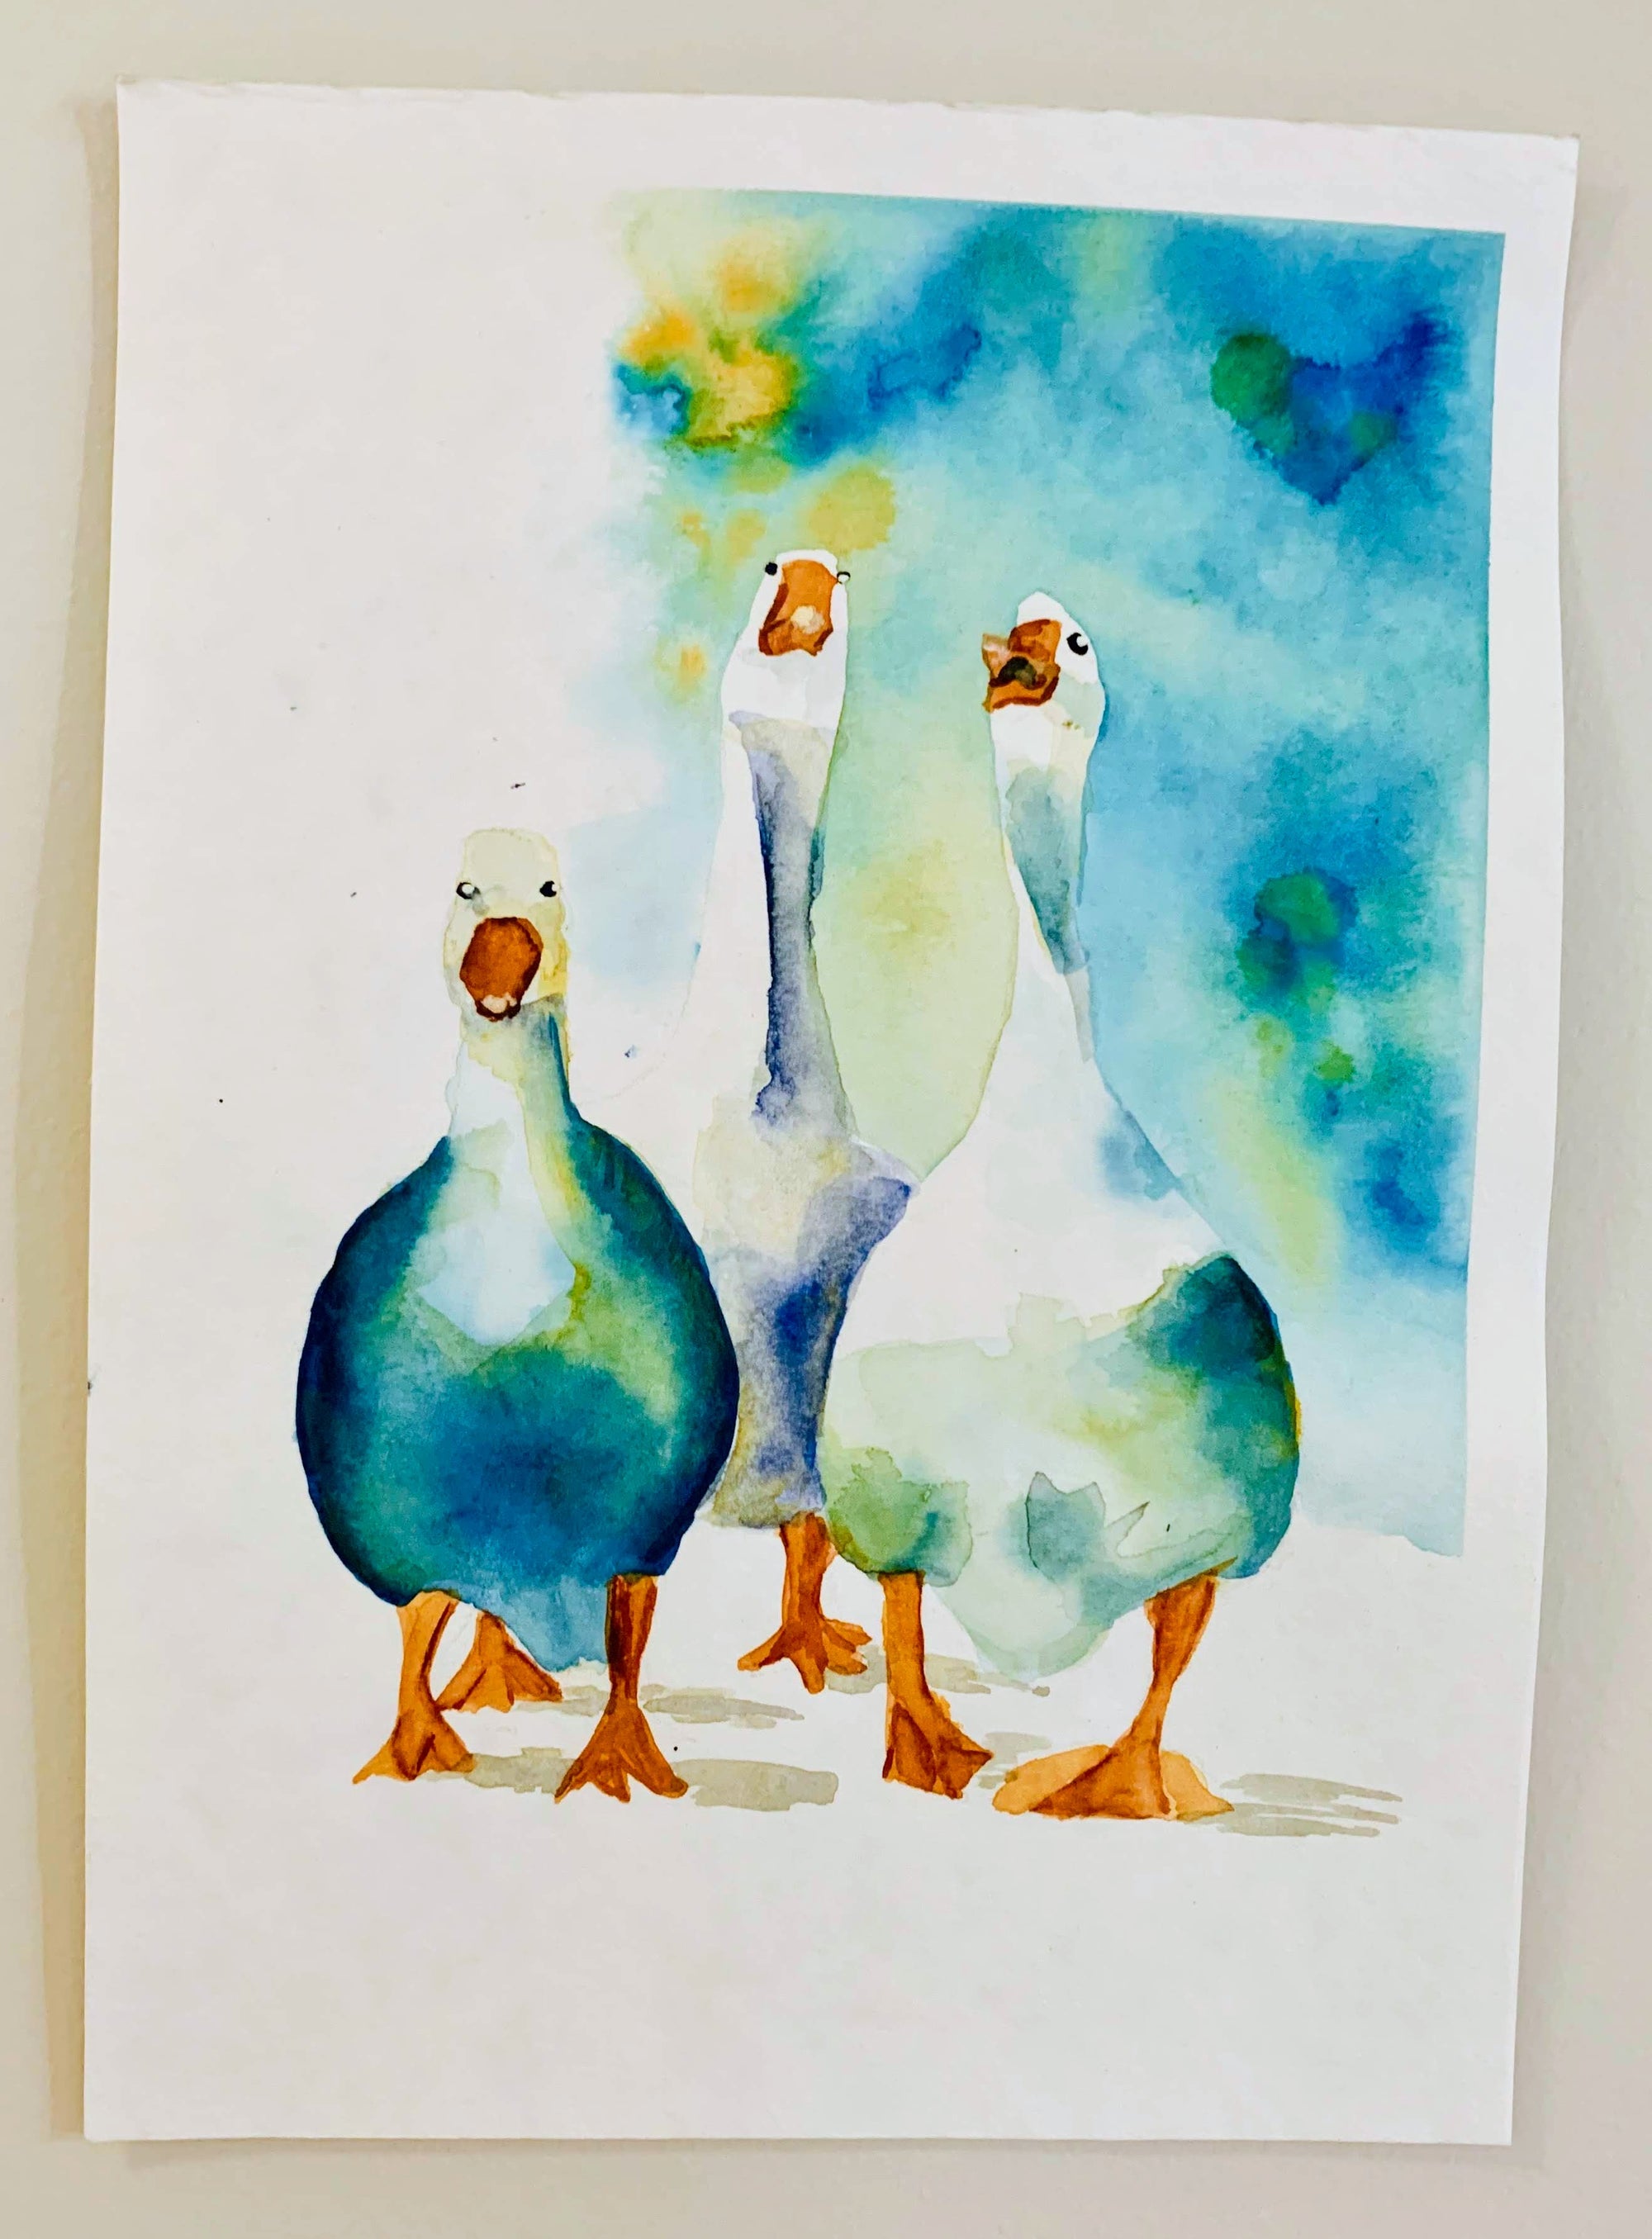 Discovering watercolours